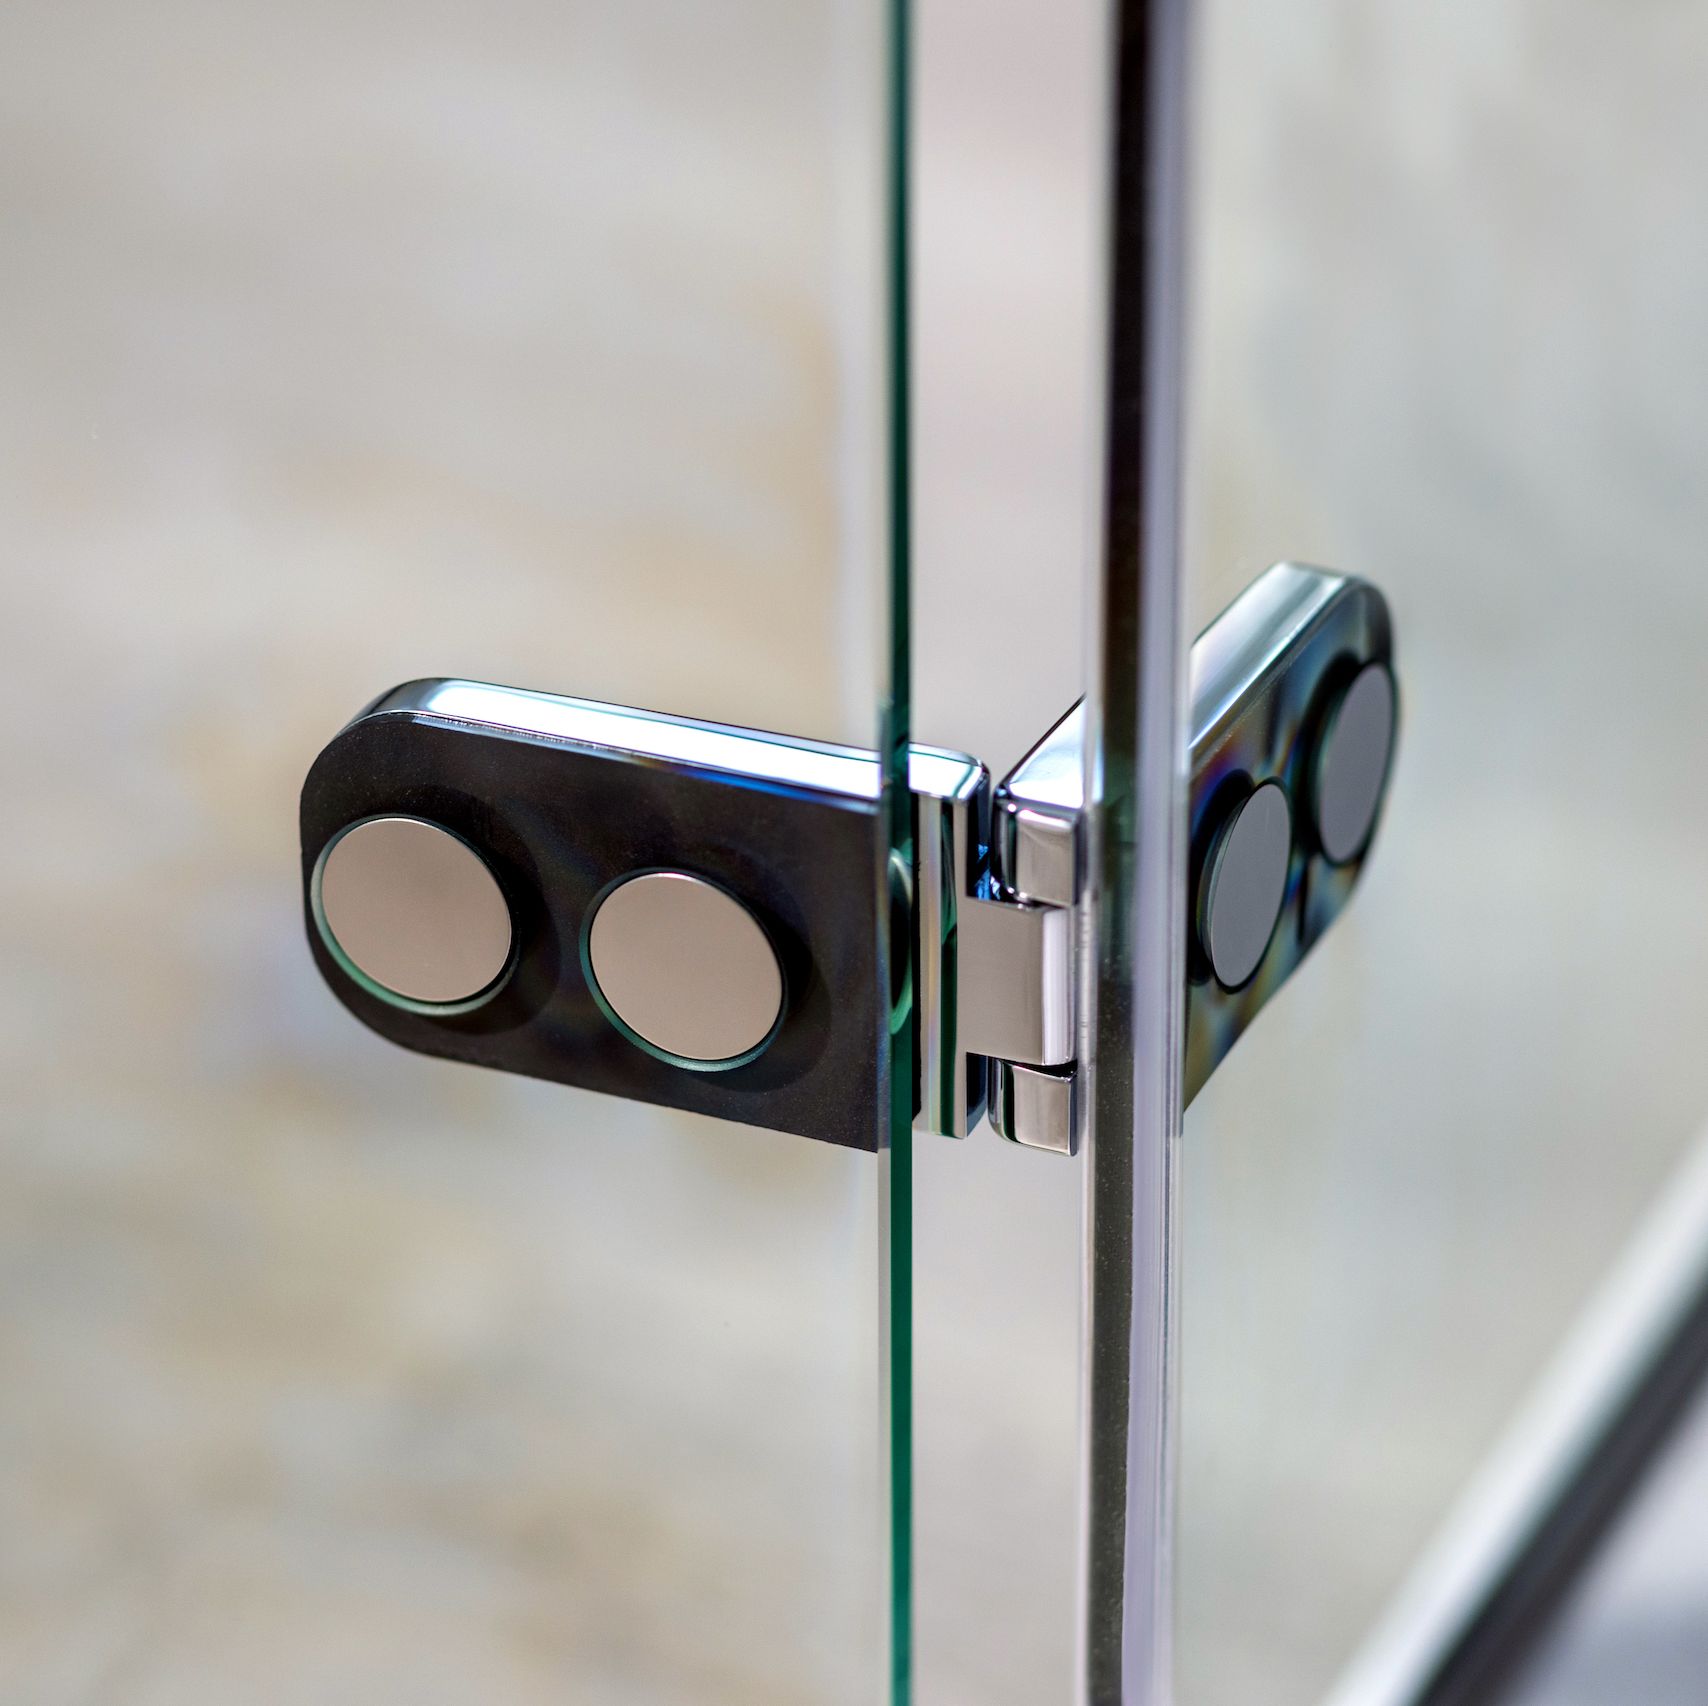 Flush countersunk interior hinges - a flush-to-glass finish making it a joy to clean. Every detail matters.